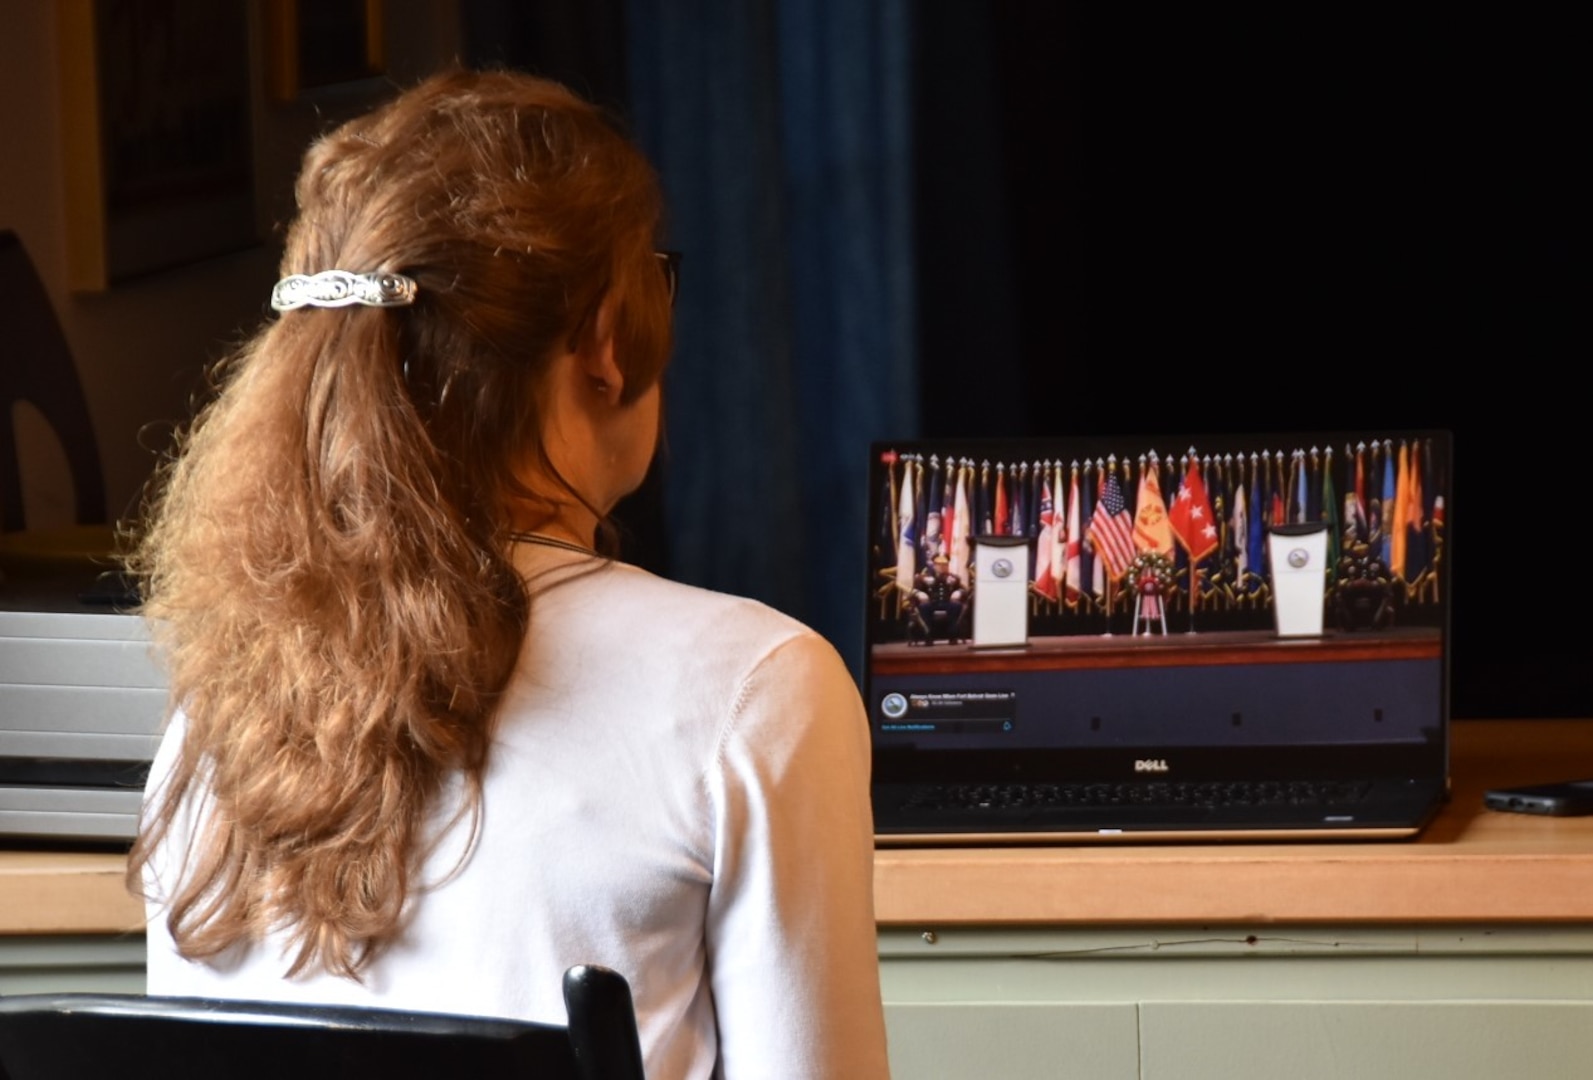 A woman is seated watching a streaming video of a keynote address from a laptop